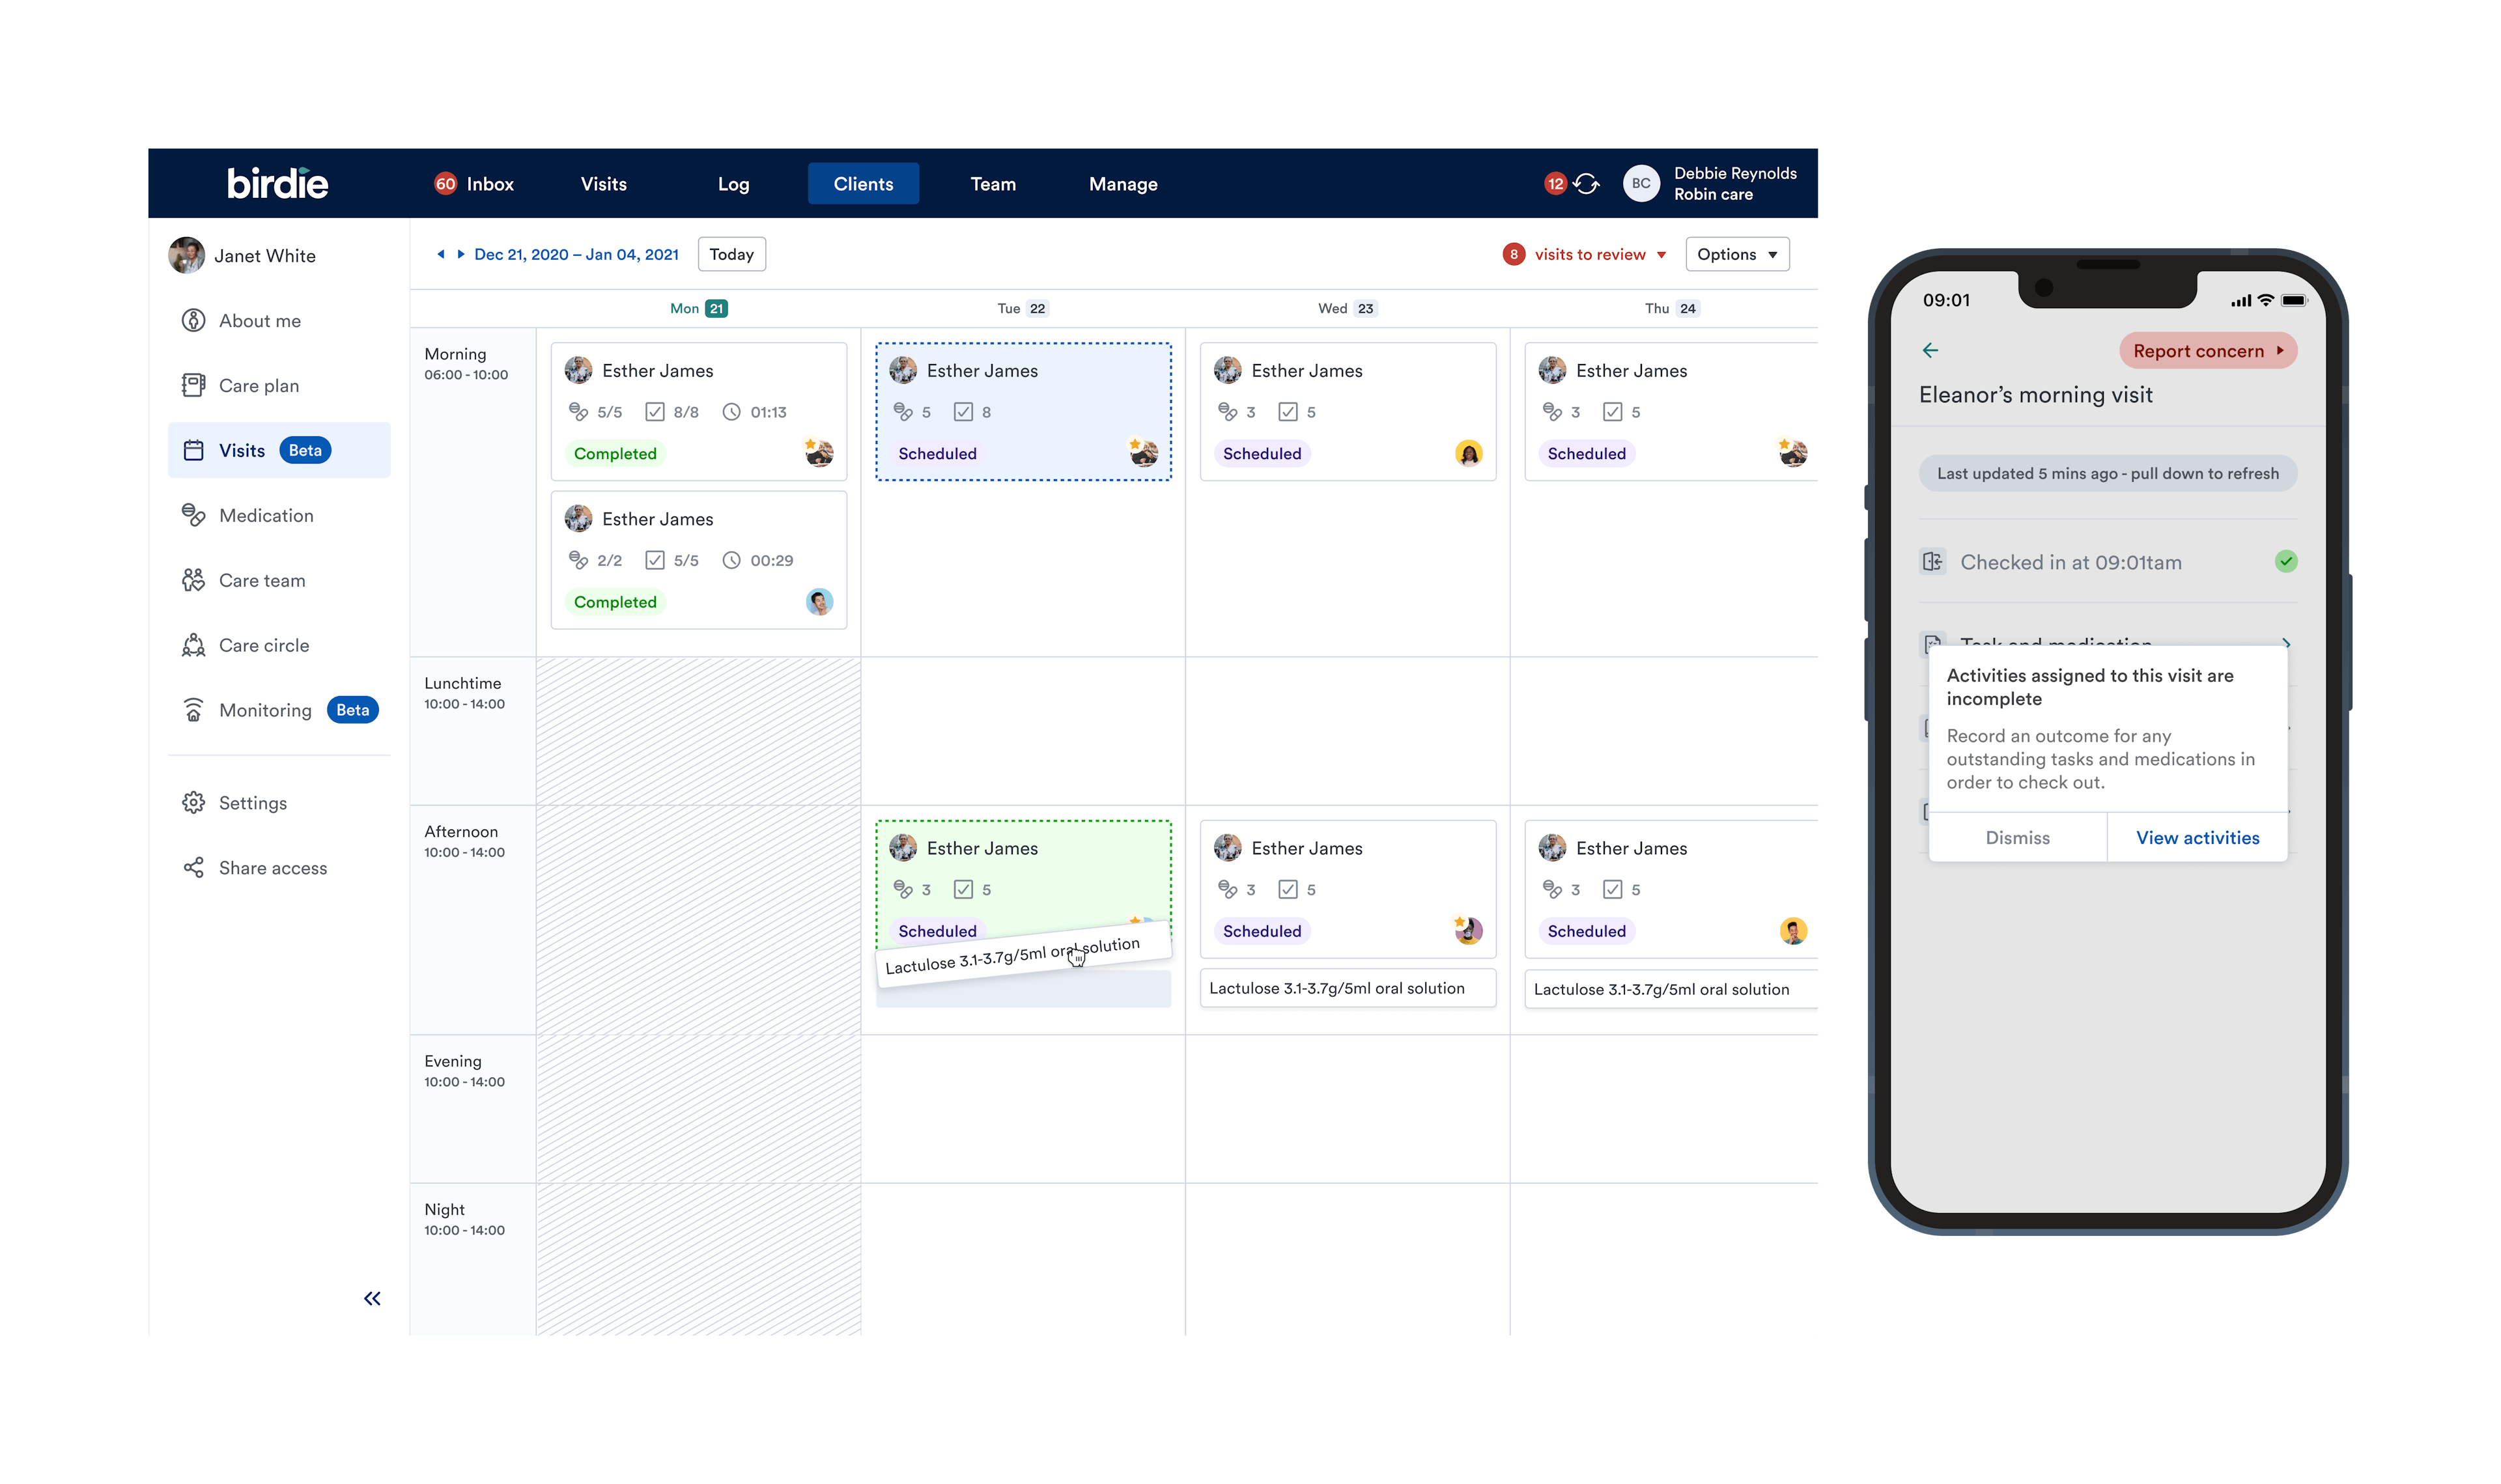 Left: Calendar interface, allowing you to align tasks and medication with visits. Right: Preventing carers from checking out until all medication and task assigned to visit had been recorded. This significantly increased medication adherence and cut down on unnessecary alerts.